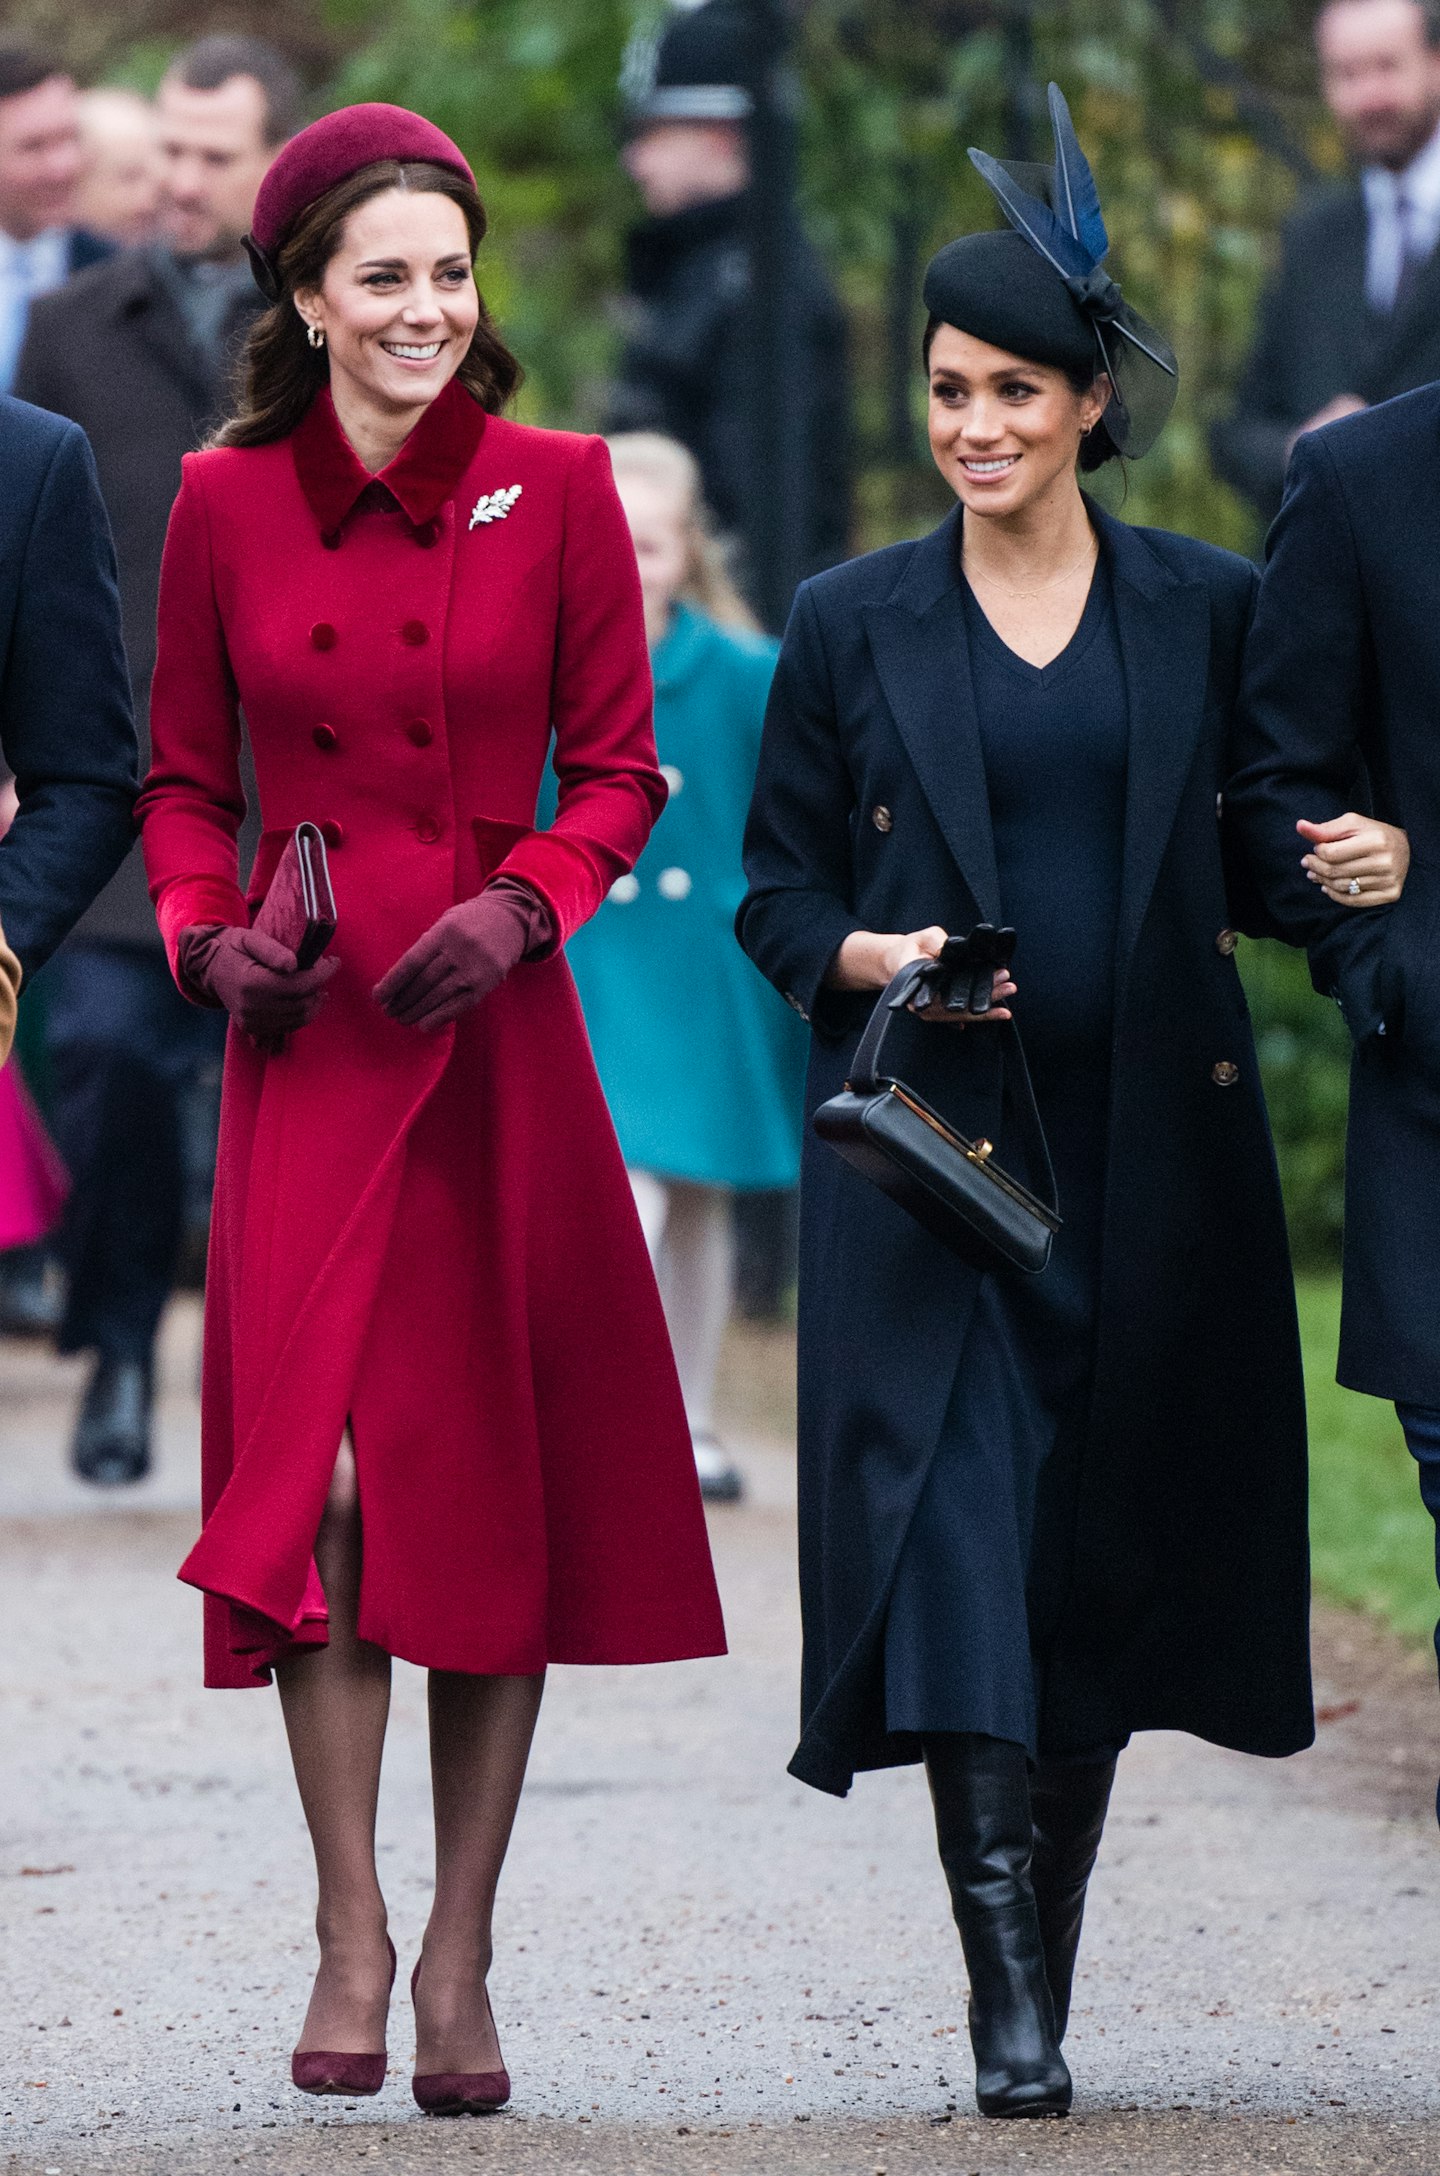 Meghan Markle opted for darker shades at the Christmas church service, while Kate stood out in berry shades